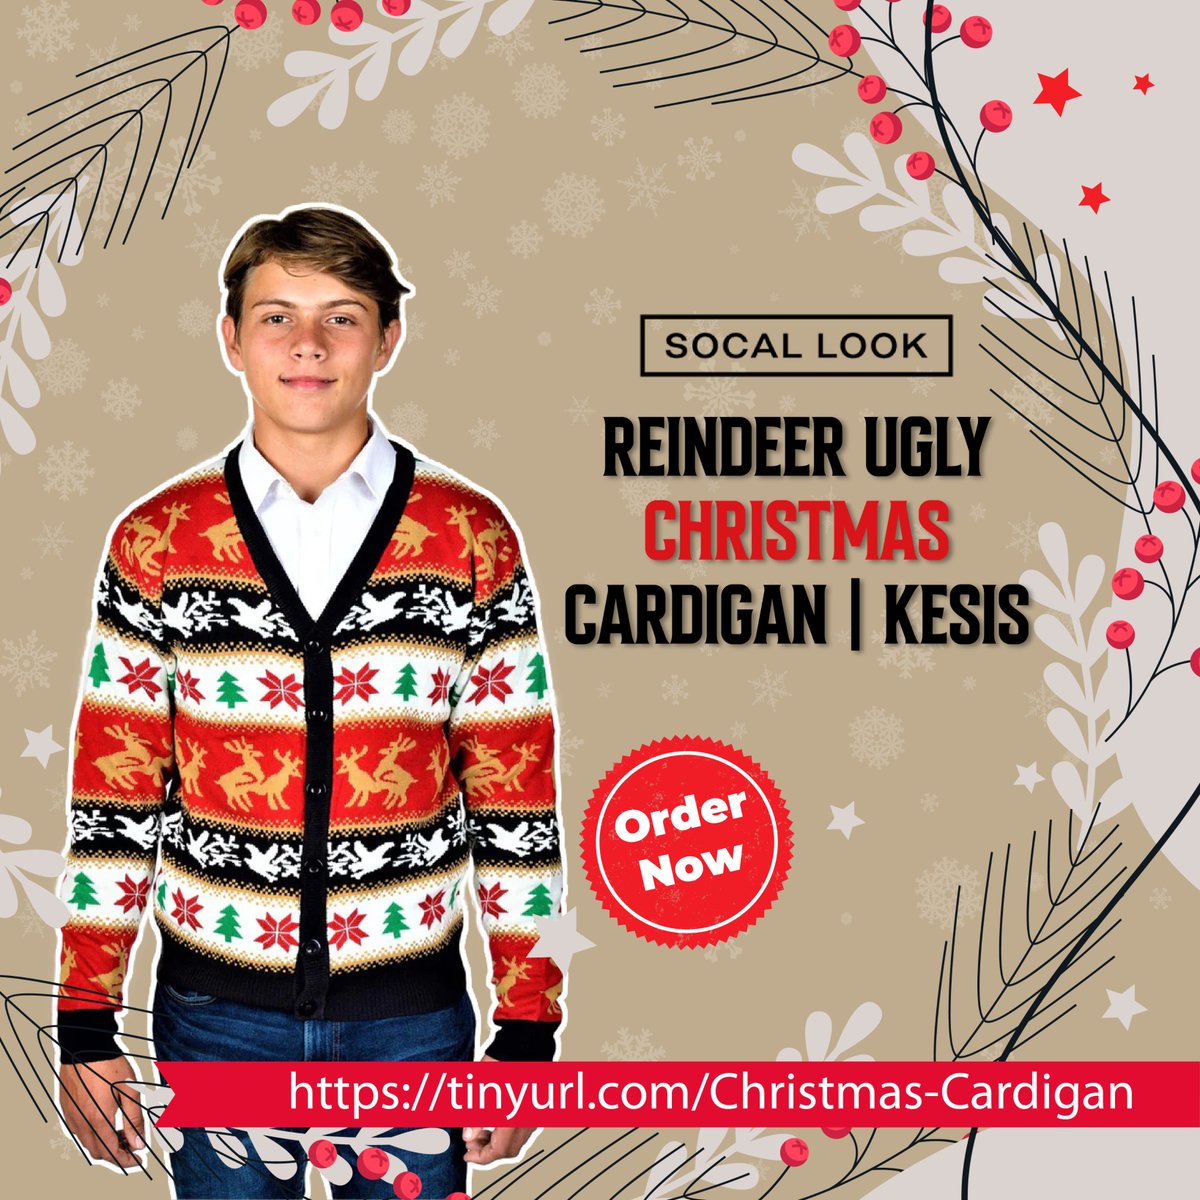 🎄 Get ready for a festive fashion takeover! 🦌 Introducing our 'Reindeer Ugly Christmas Cardigan.' 🎅 Embrace the holiday spirit in style with this quirky, cozy. tinyurl.com/Christmas-Card… #UglyChristmasSweater #ReindeerCardigan #FestiveStyle #ReindeerCardigans #kesis